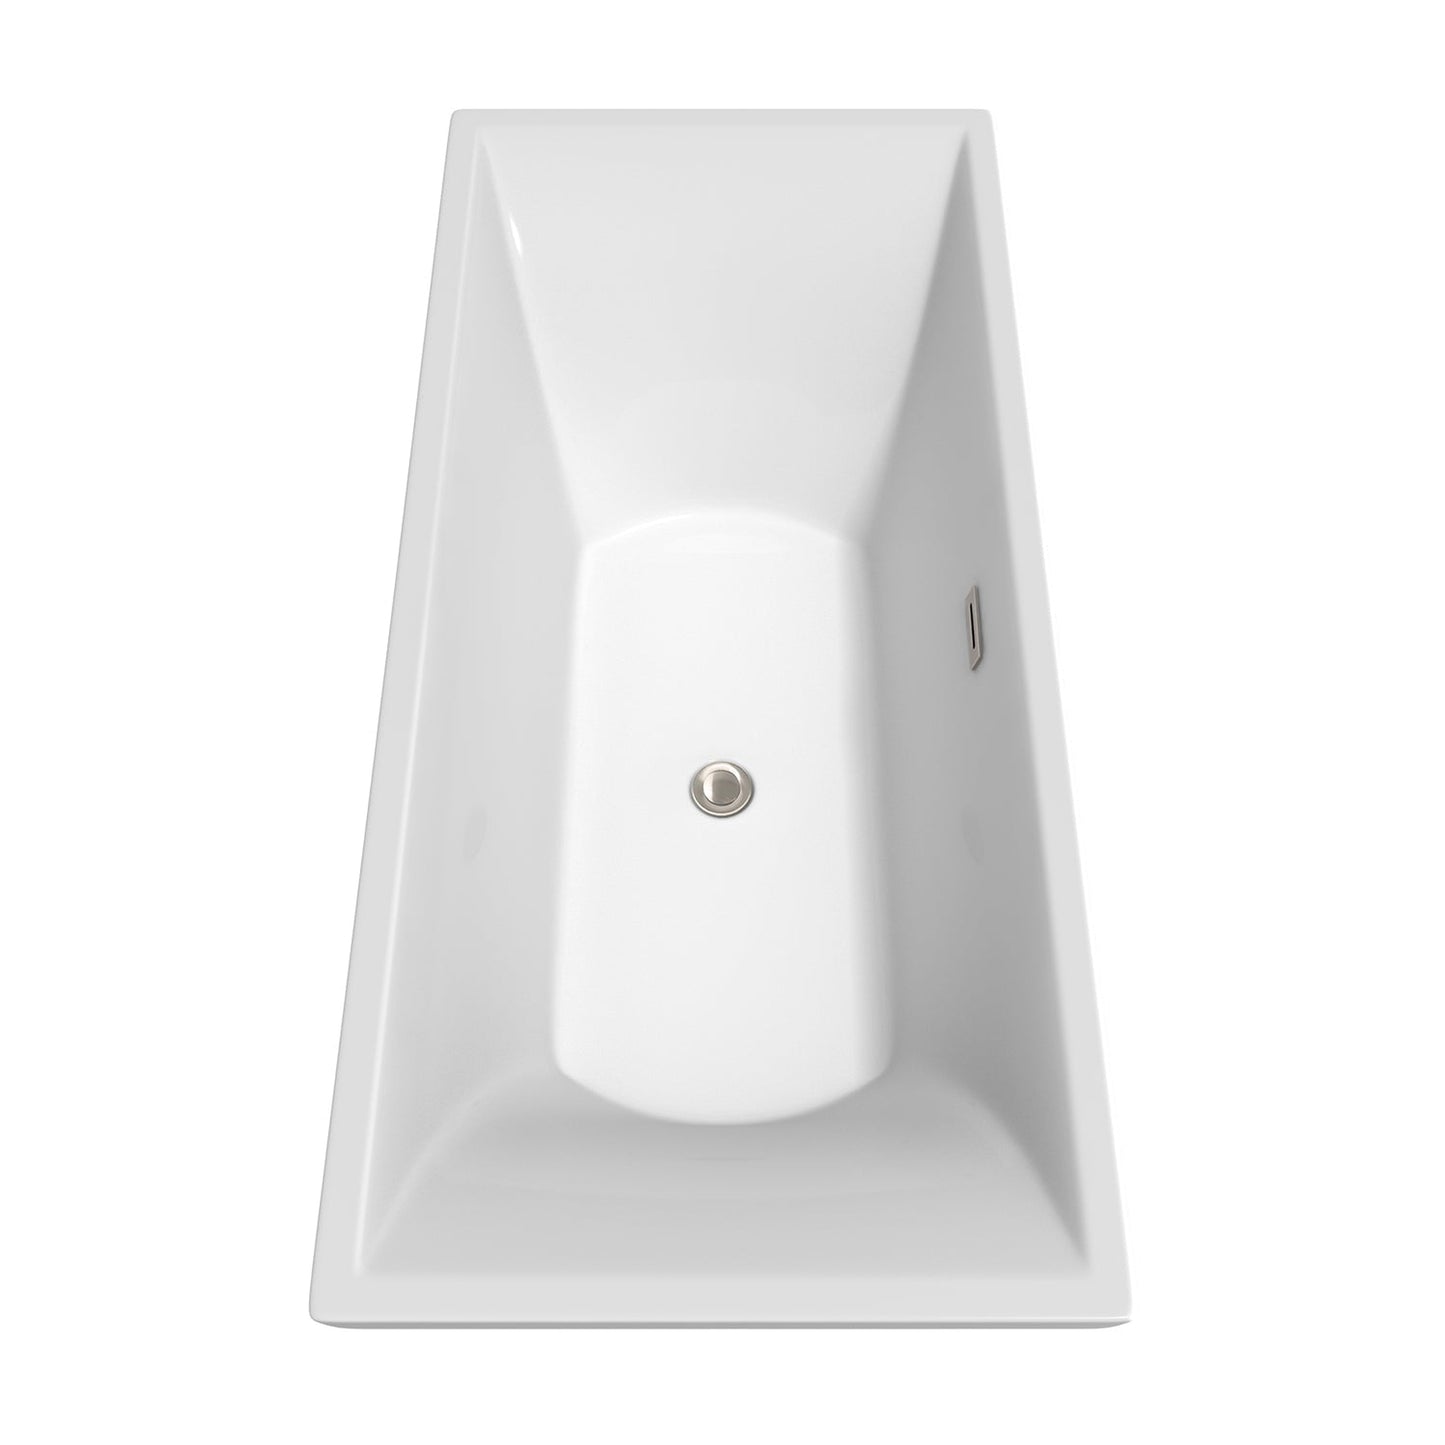 Wyndham Collection Maryam 71" Freestanding Bathtub in White With Brushed Nickel Drain and Overflow Trim